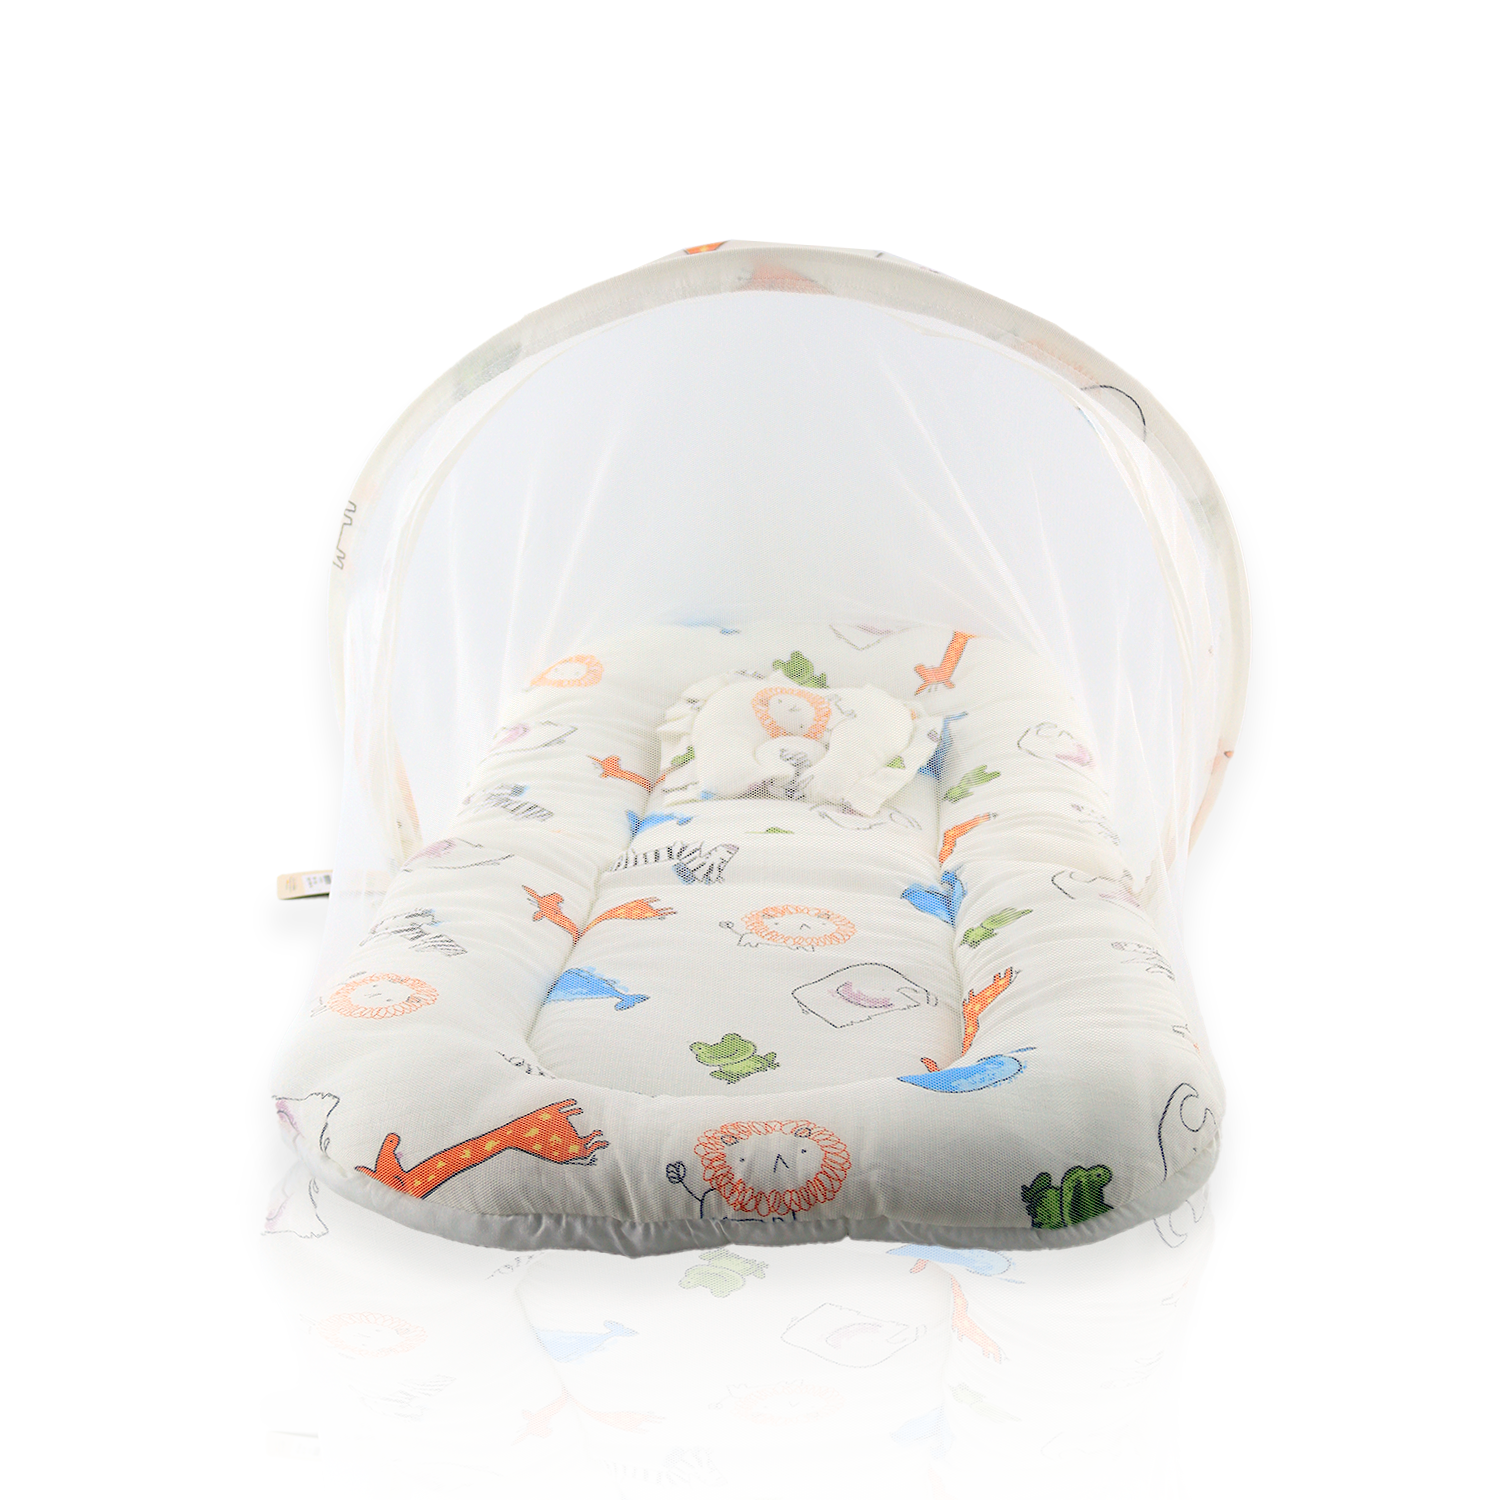 Cotton Infants Washable New born Baby bedding set With Mosquito Net And Pillow Mosquito Net